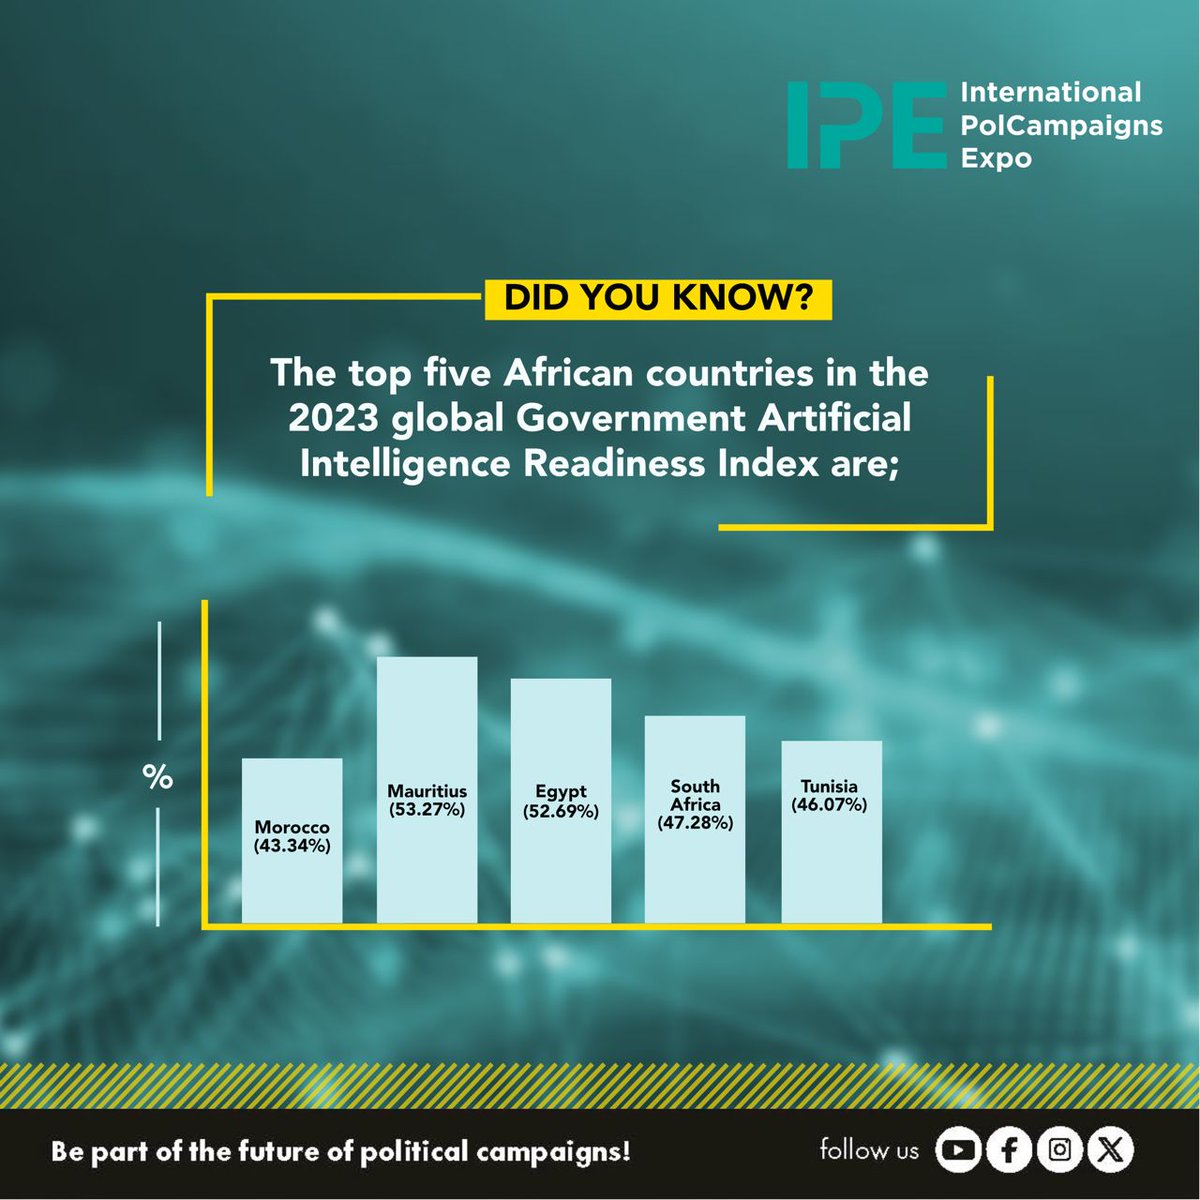 These nations are leading the continent in embracing AI technologies, paving the way for innovation and digital transformation across various sectors. The question remains, how can we increase readiness and have more countries on the continent AI ready? #IPE #AIinAfrica